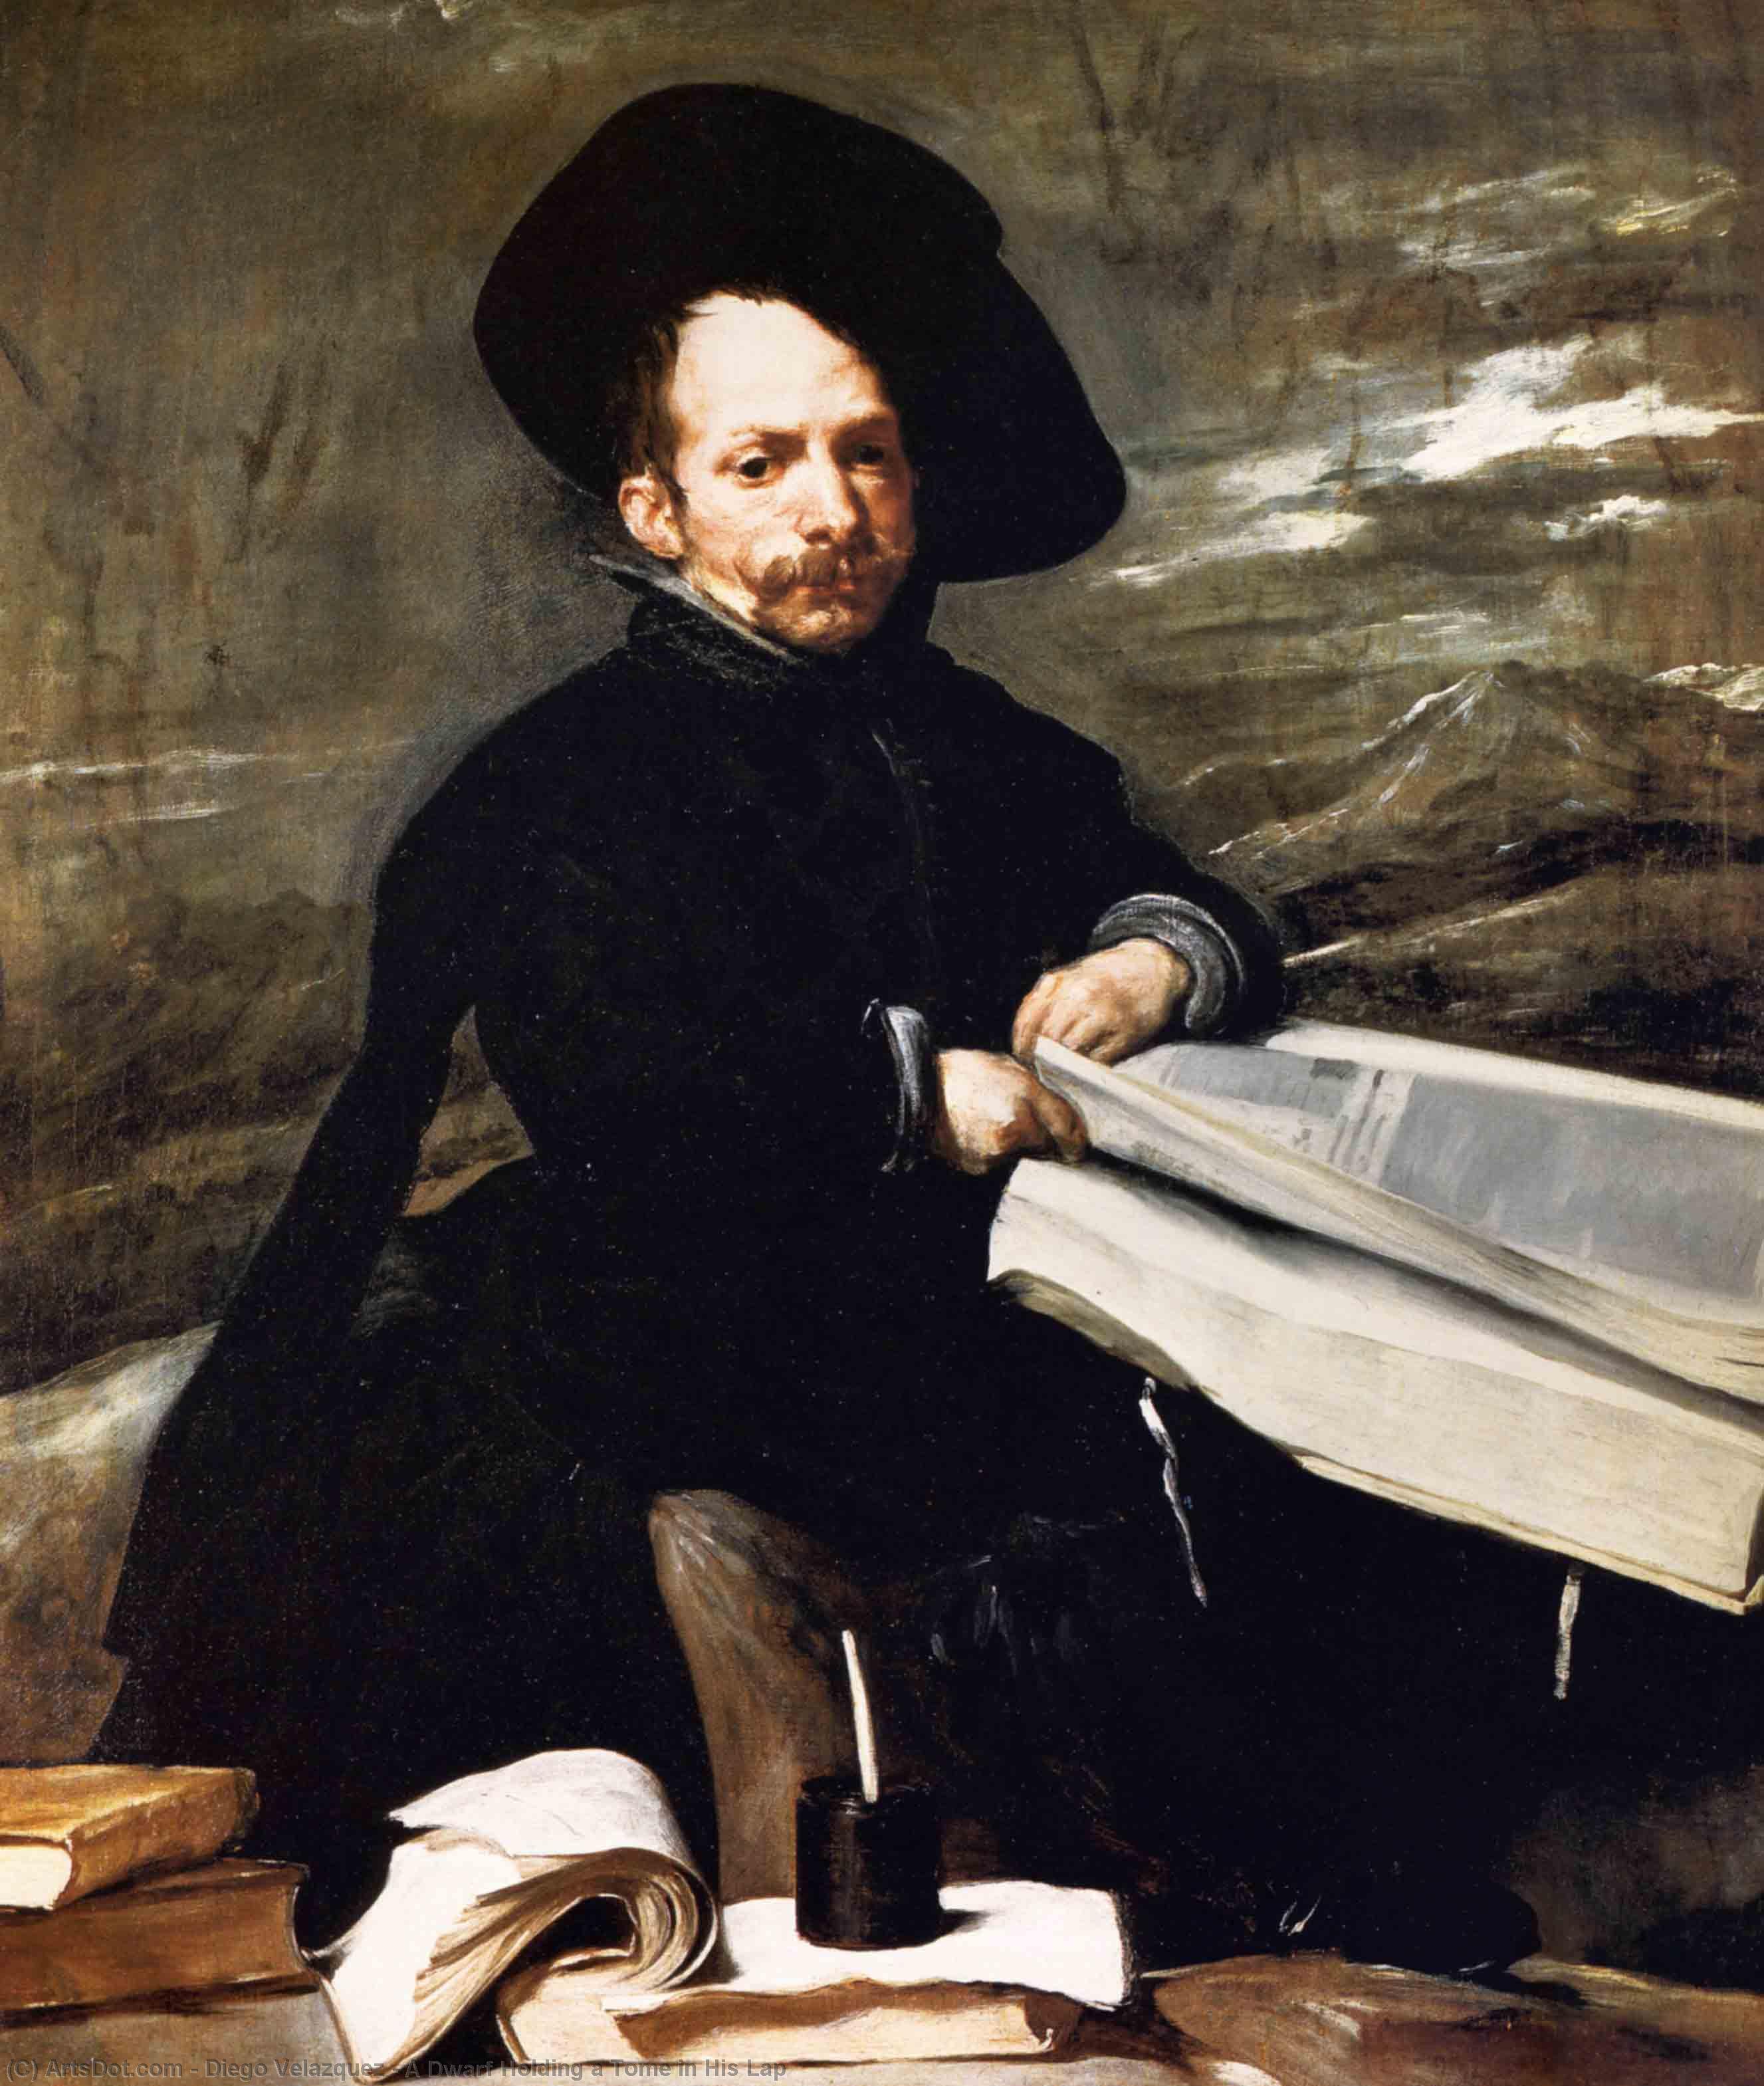 WikiOO.org - 백과 사전 - 회화, 삽화 Diego Velazquez - A Dwarf Holding a Tome in His Lap